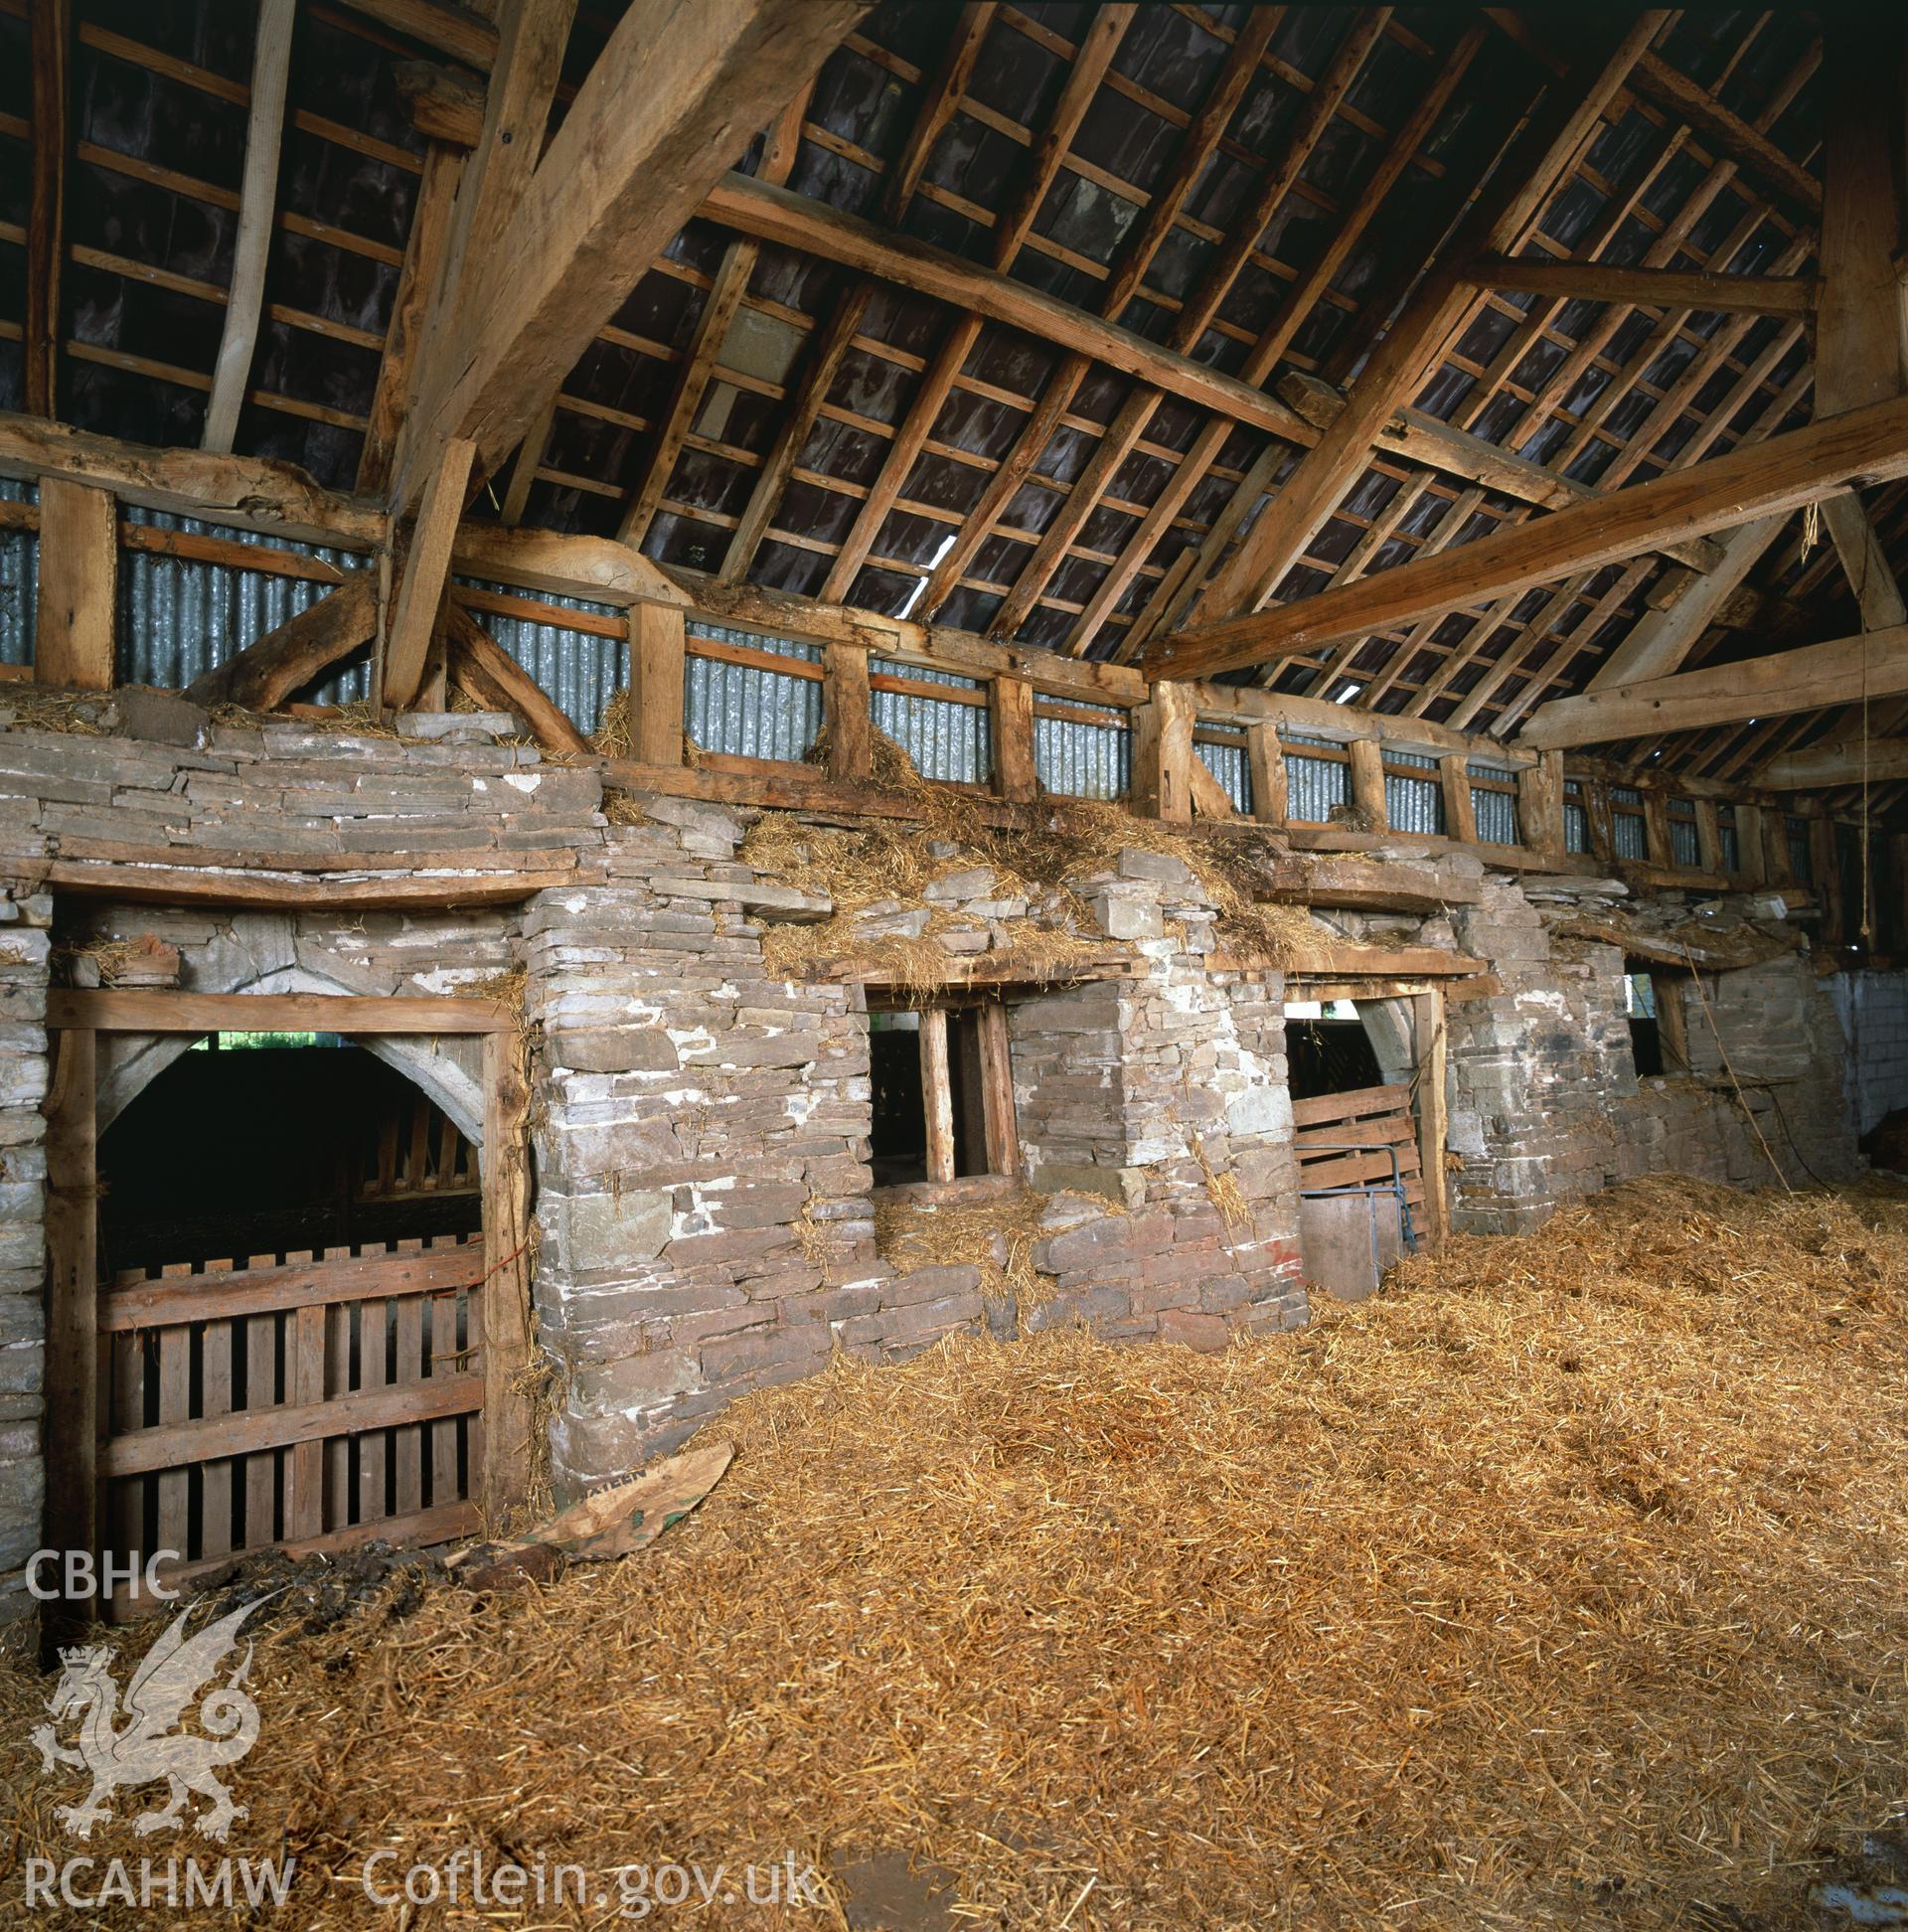 RCAHMW colour transparency showing an interior view of the east wall end of the cowhouse at Clyro Court Farm, taken by Fleur James, August 2003